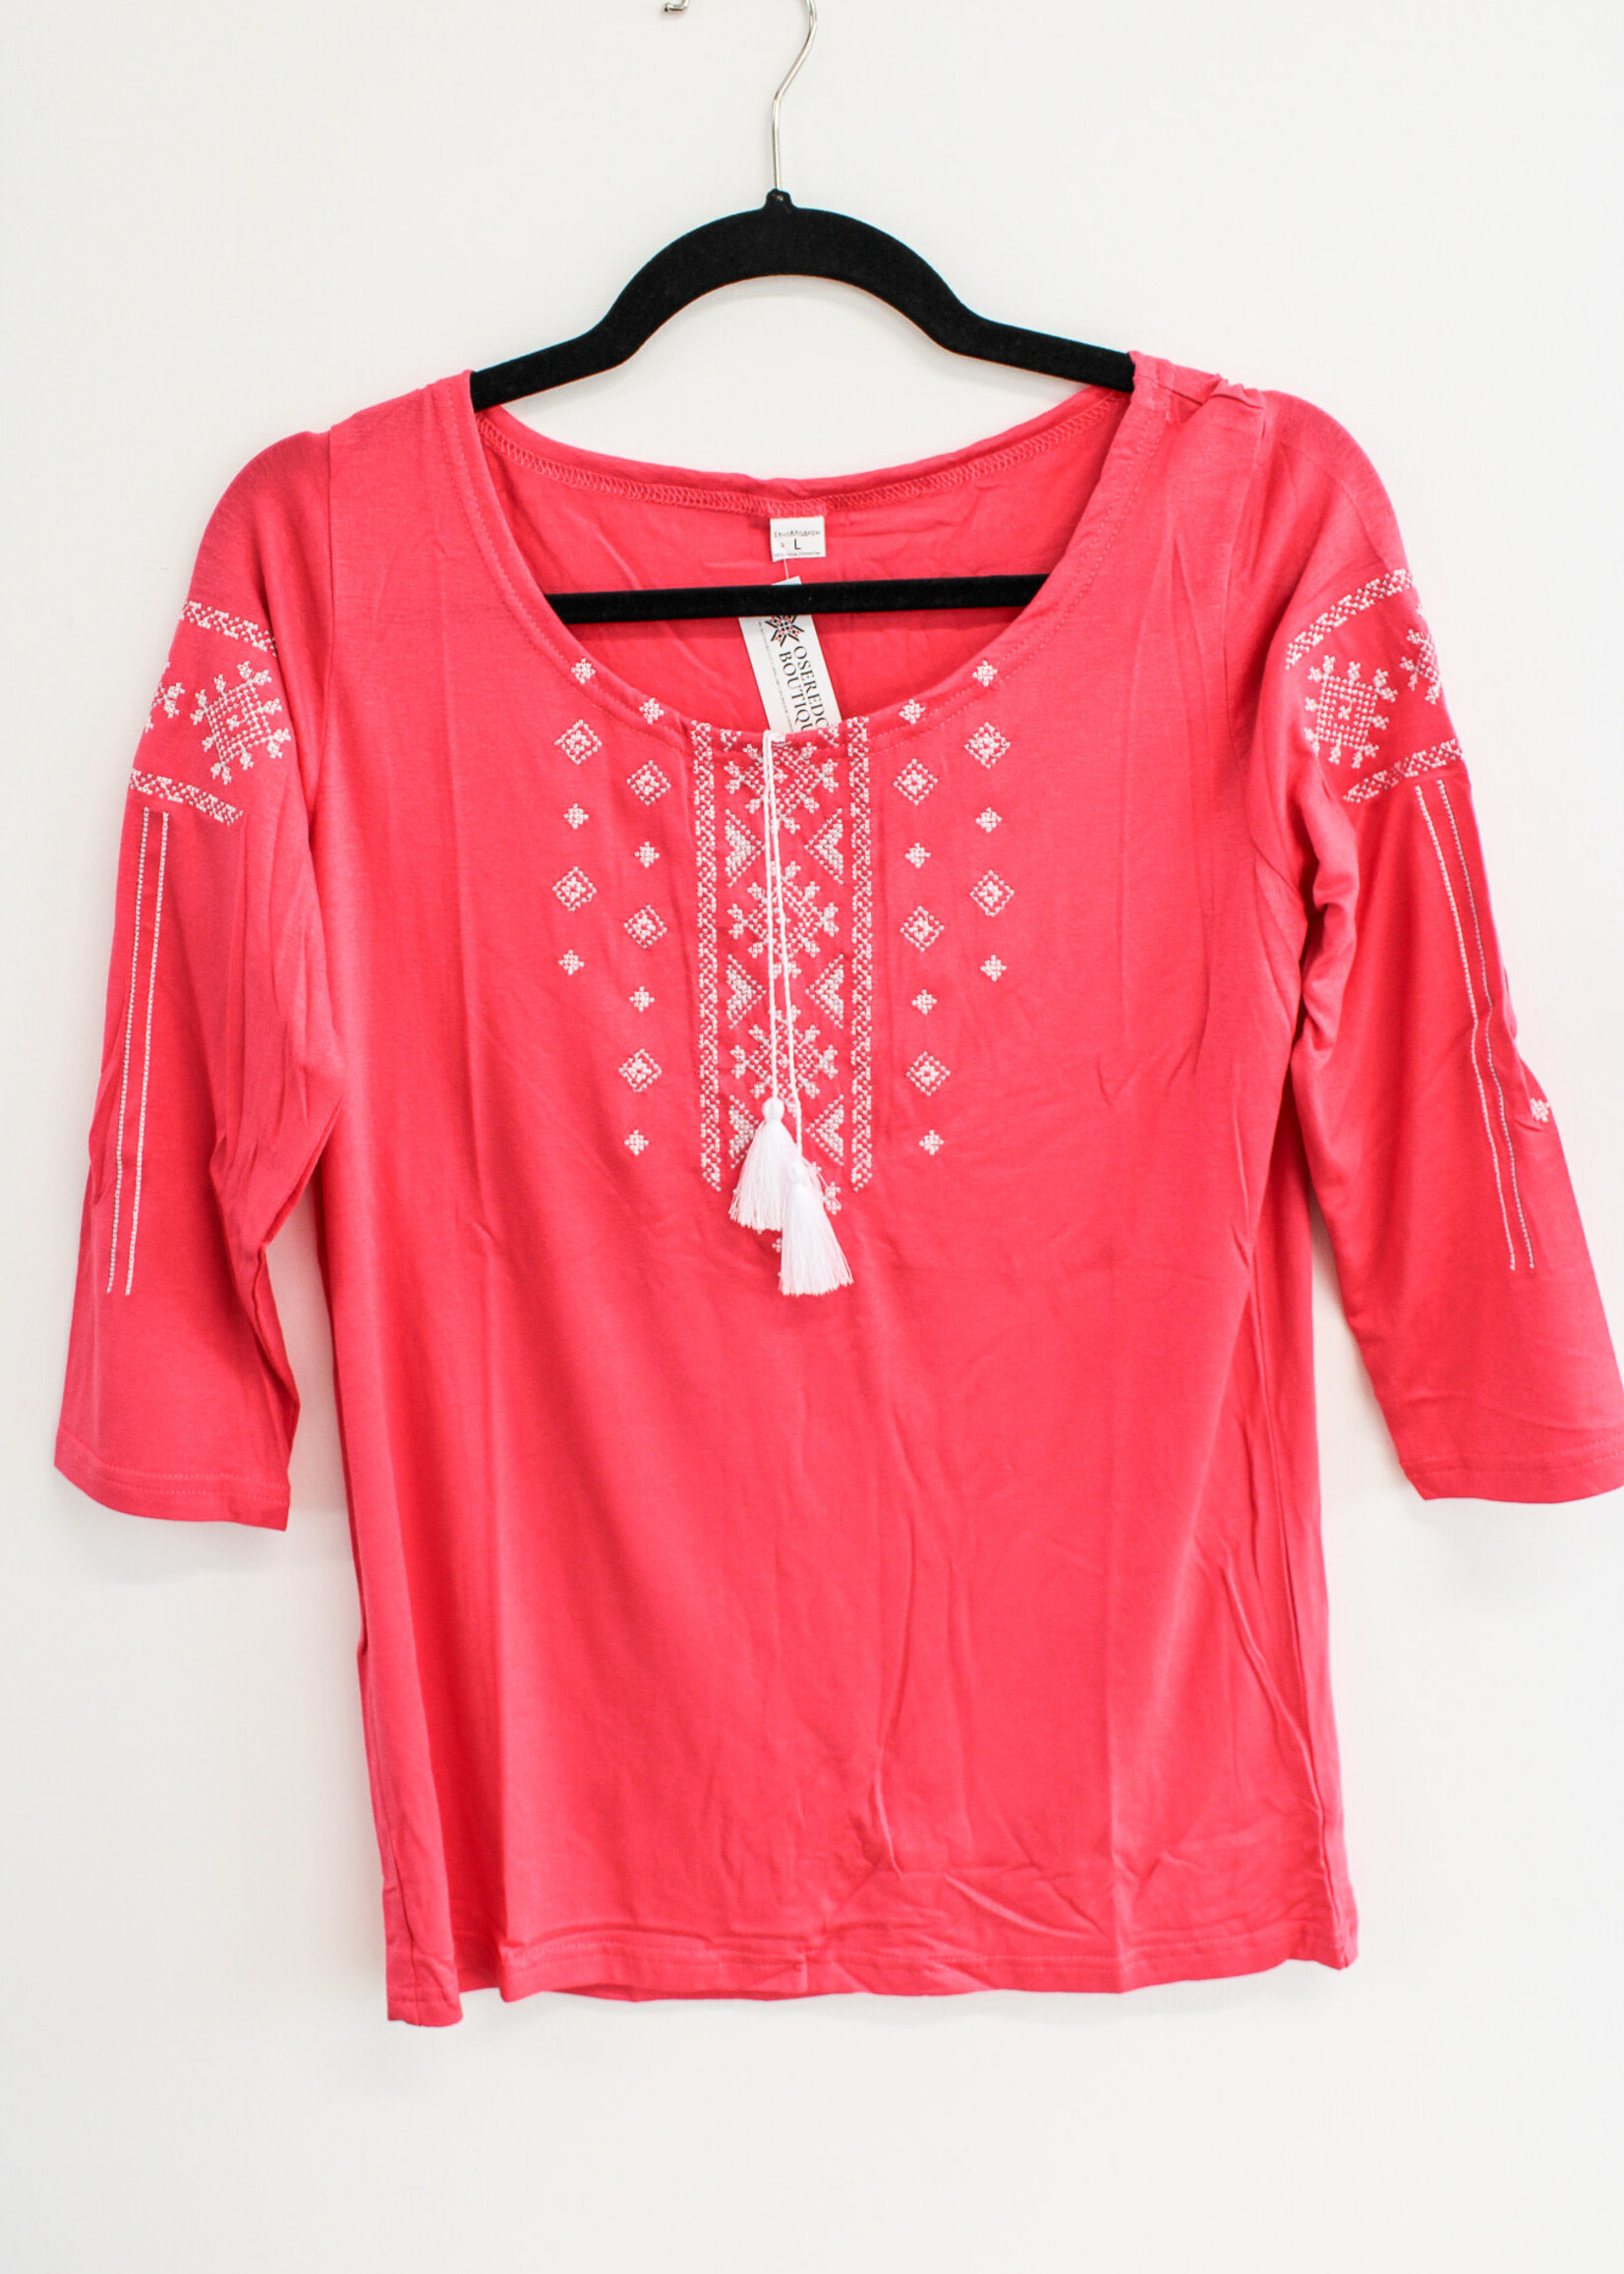 APPAREL - Shirt Pink (W), size L, 3/4 length sleeve with white tassels